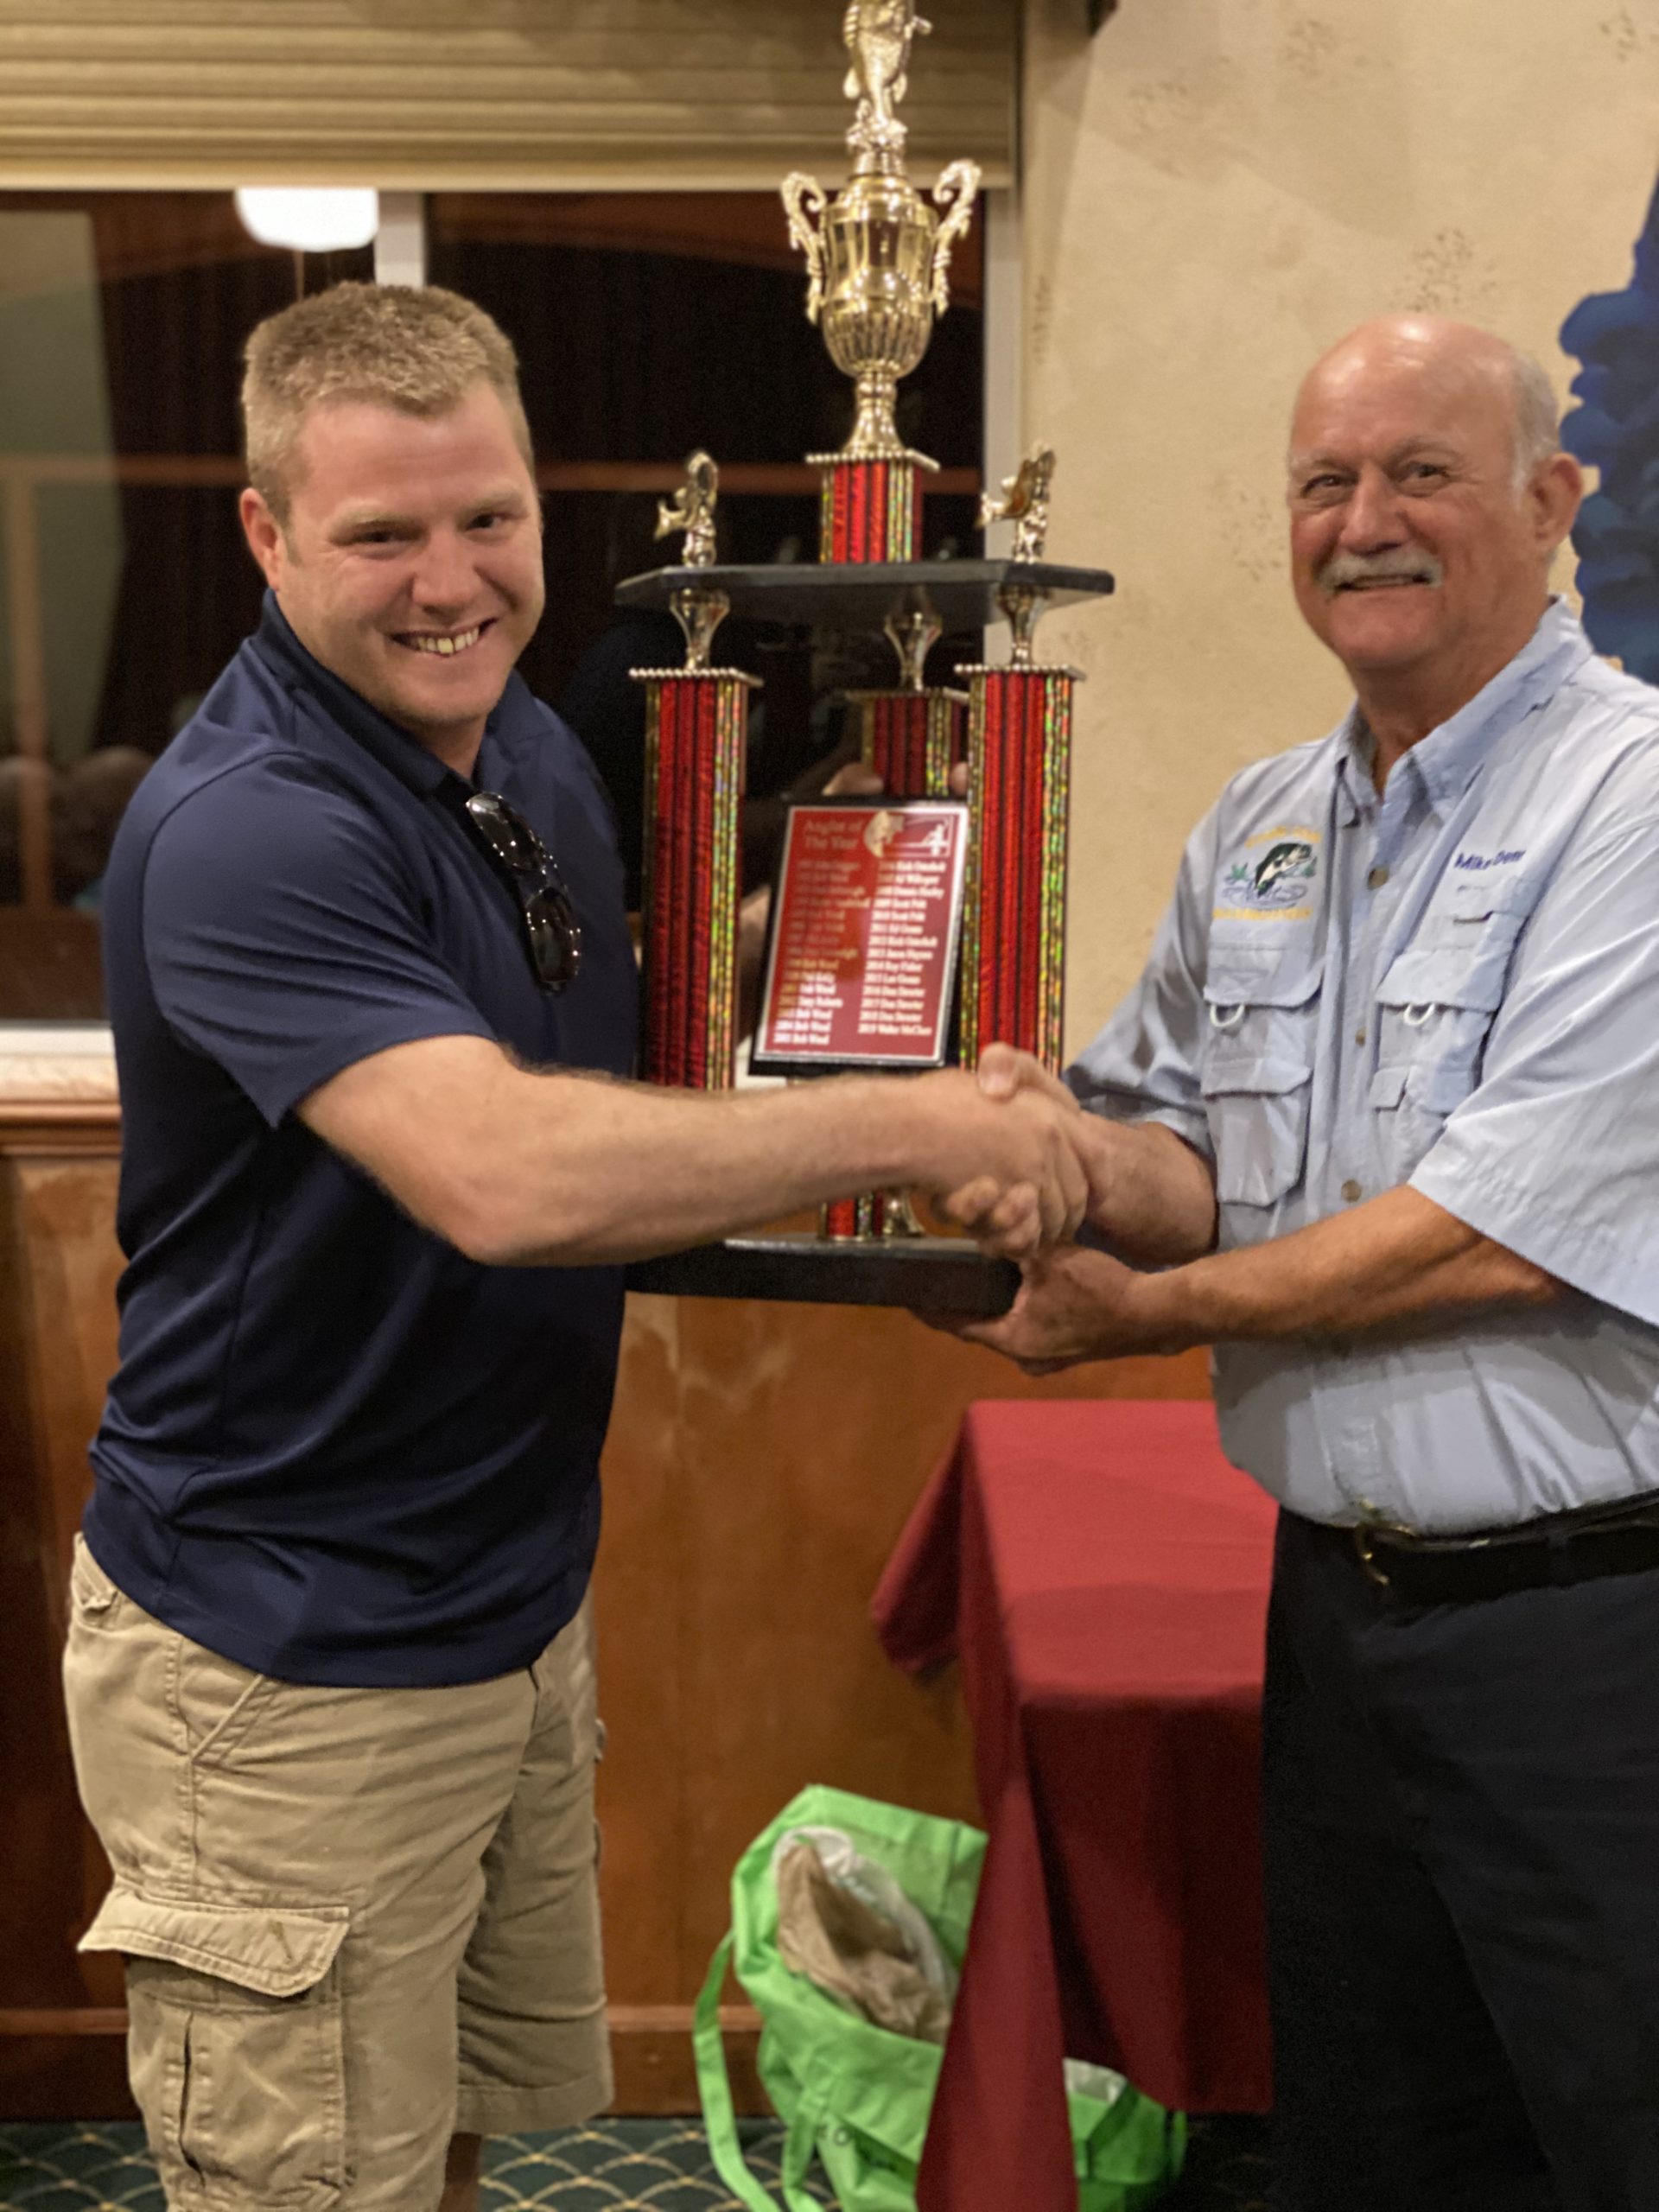 Walter McClure - 2019 Angler of the Year